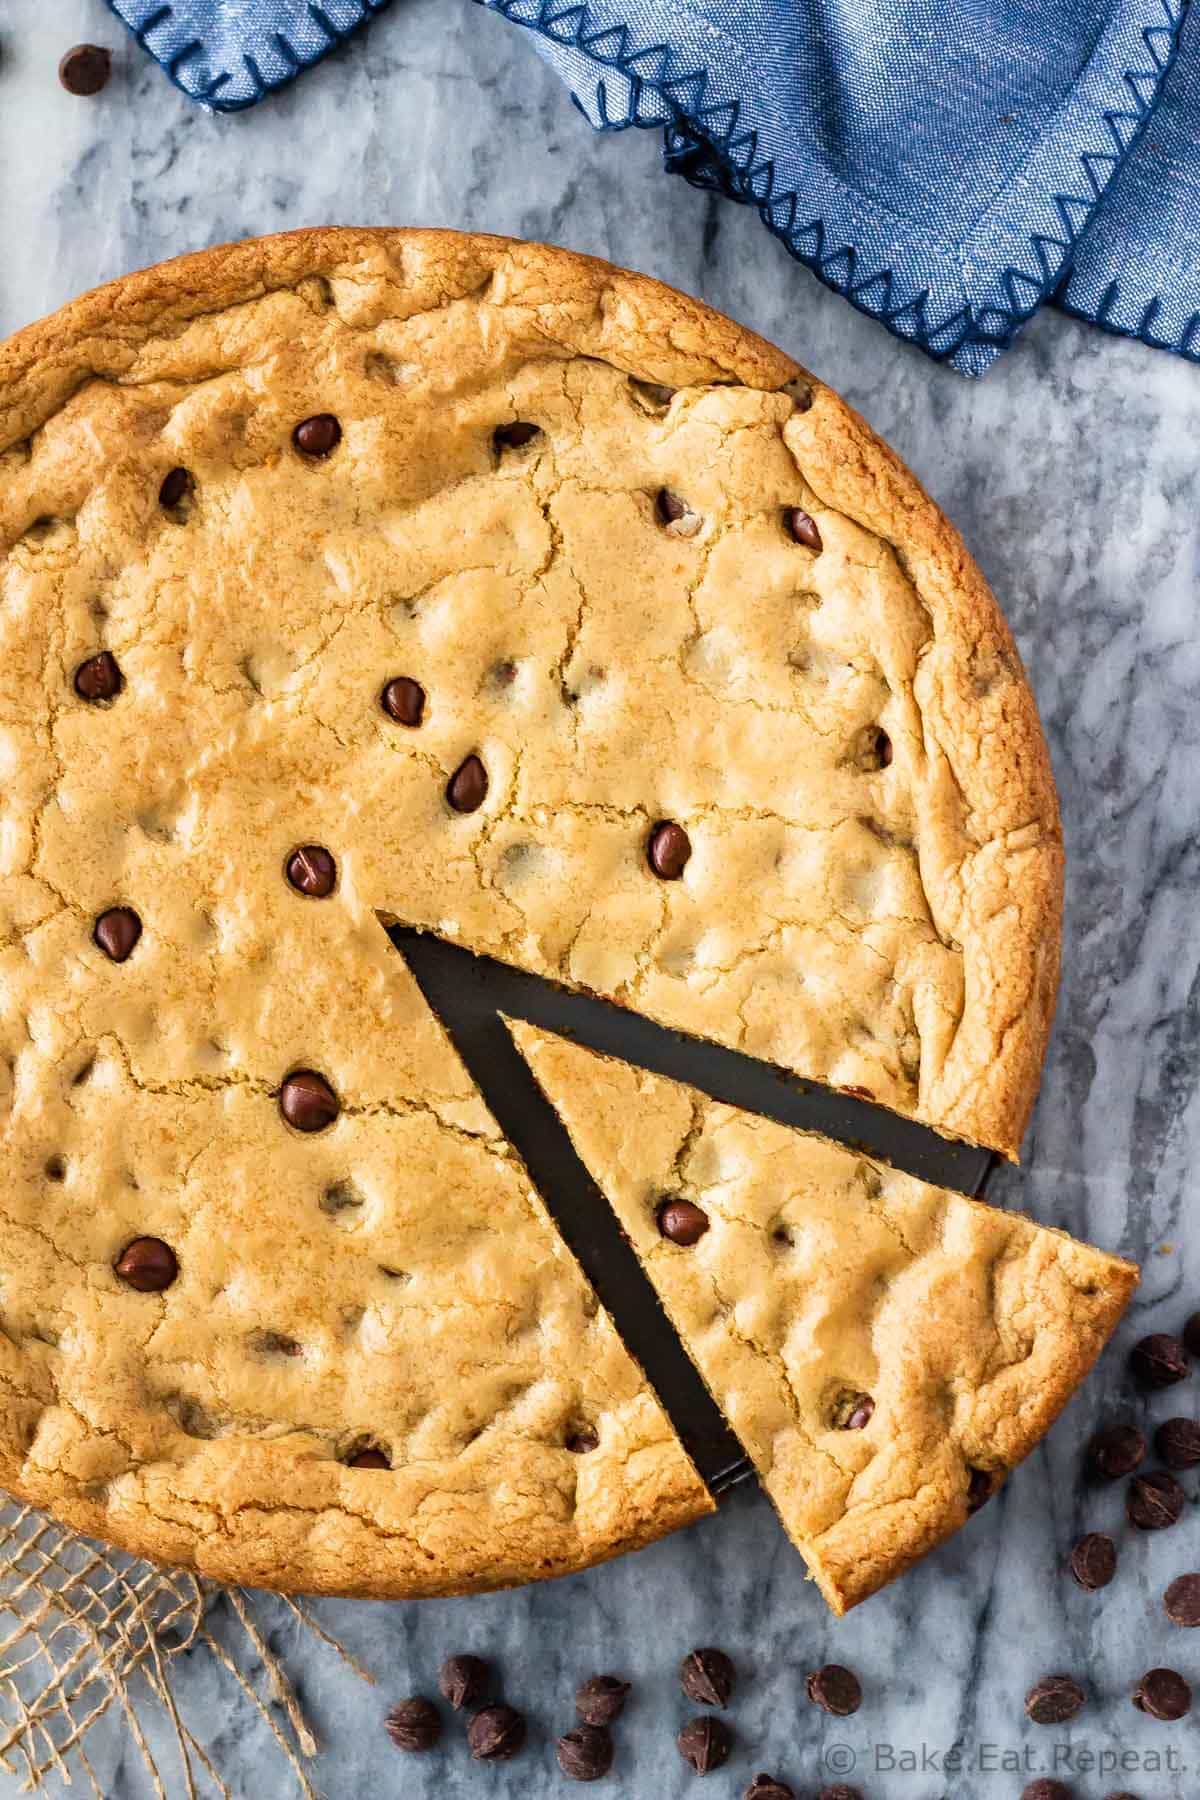 https://bake-eat-repeat.com/wp-content/uploads/2018/12/Giant-Chocolate-Chip-Cookie-4.jpg